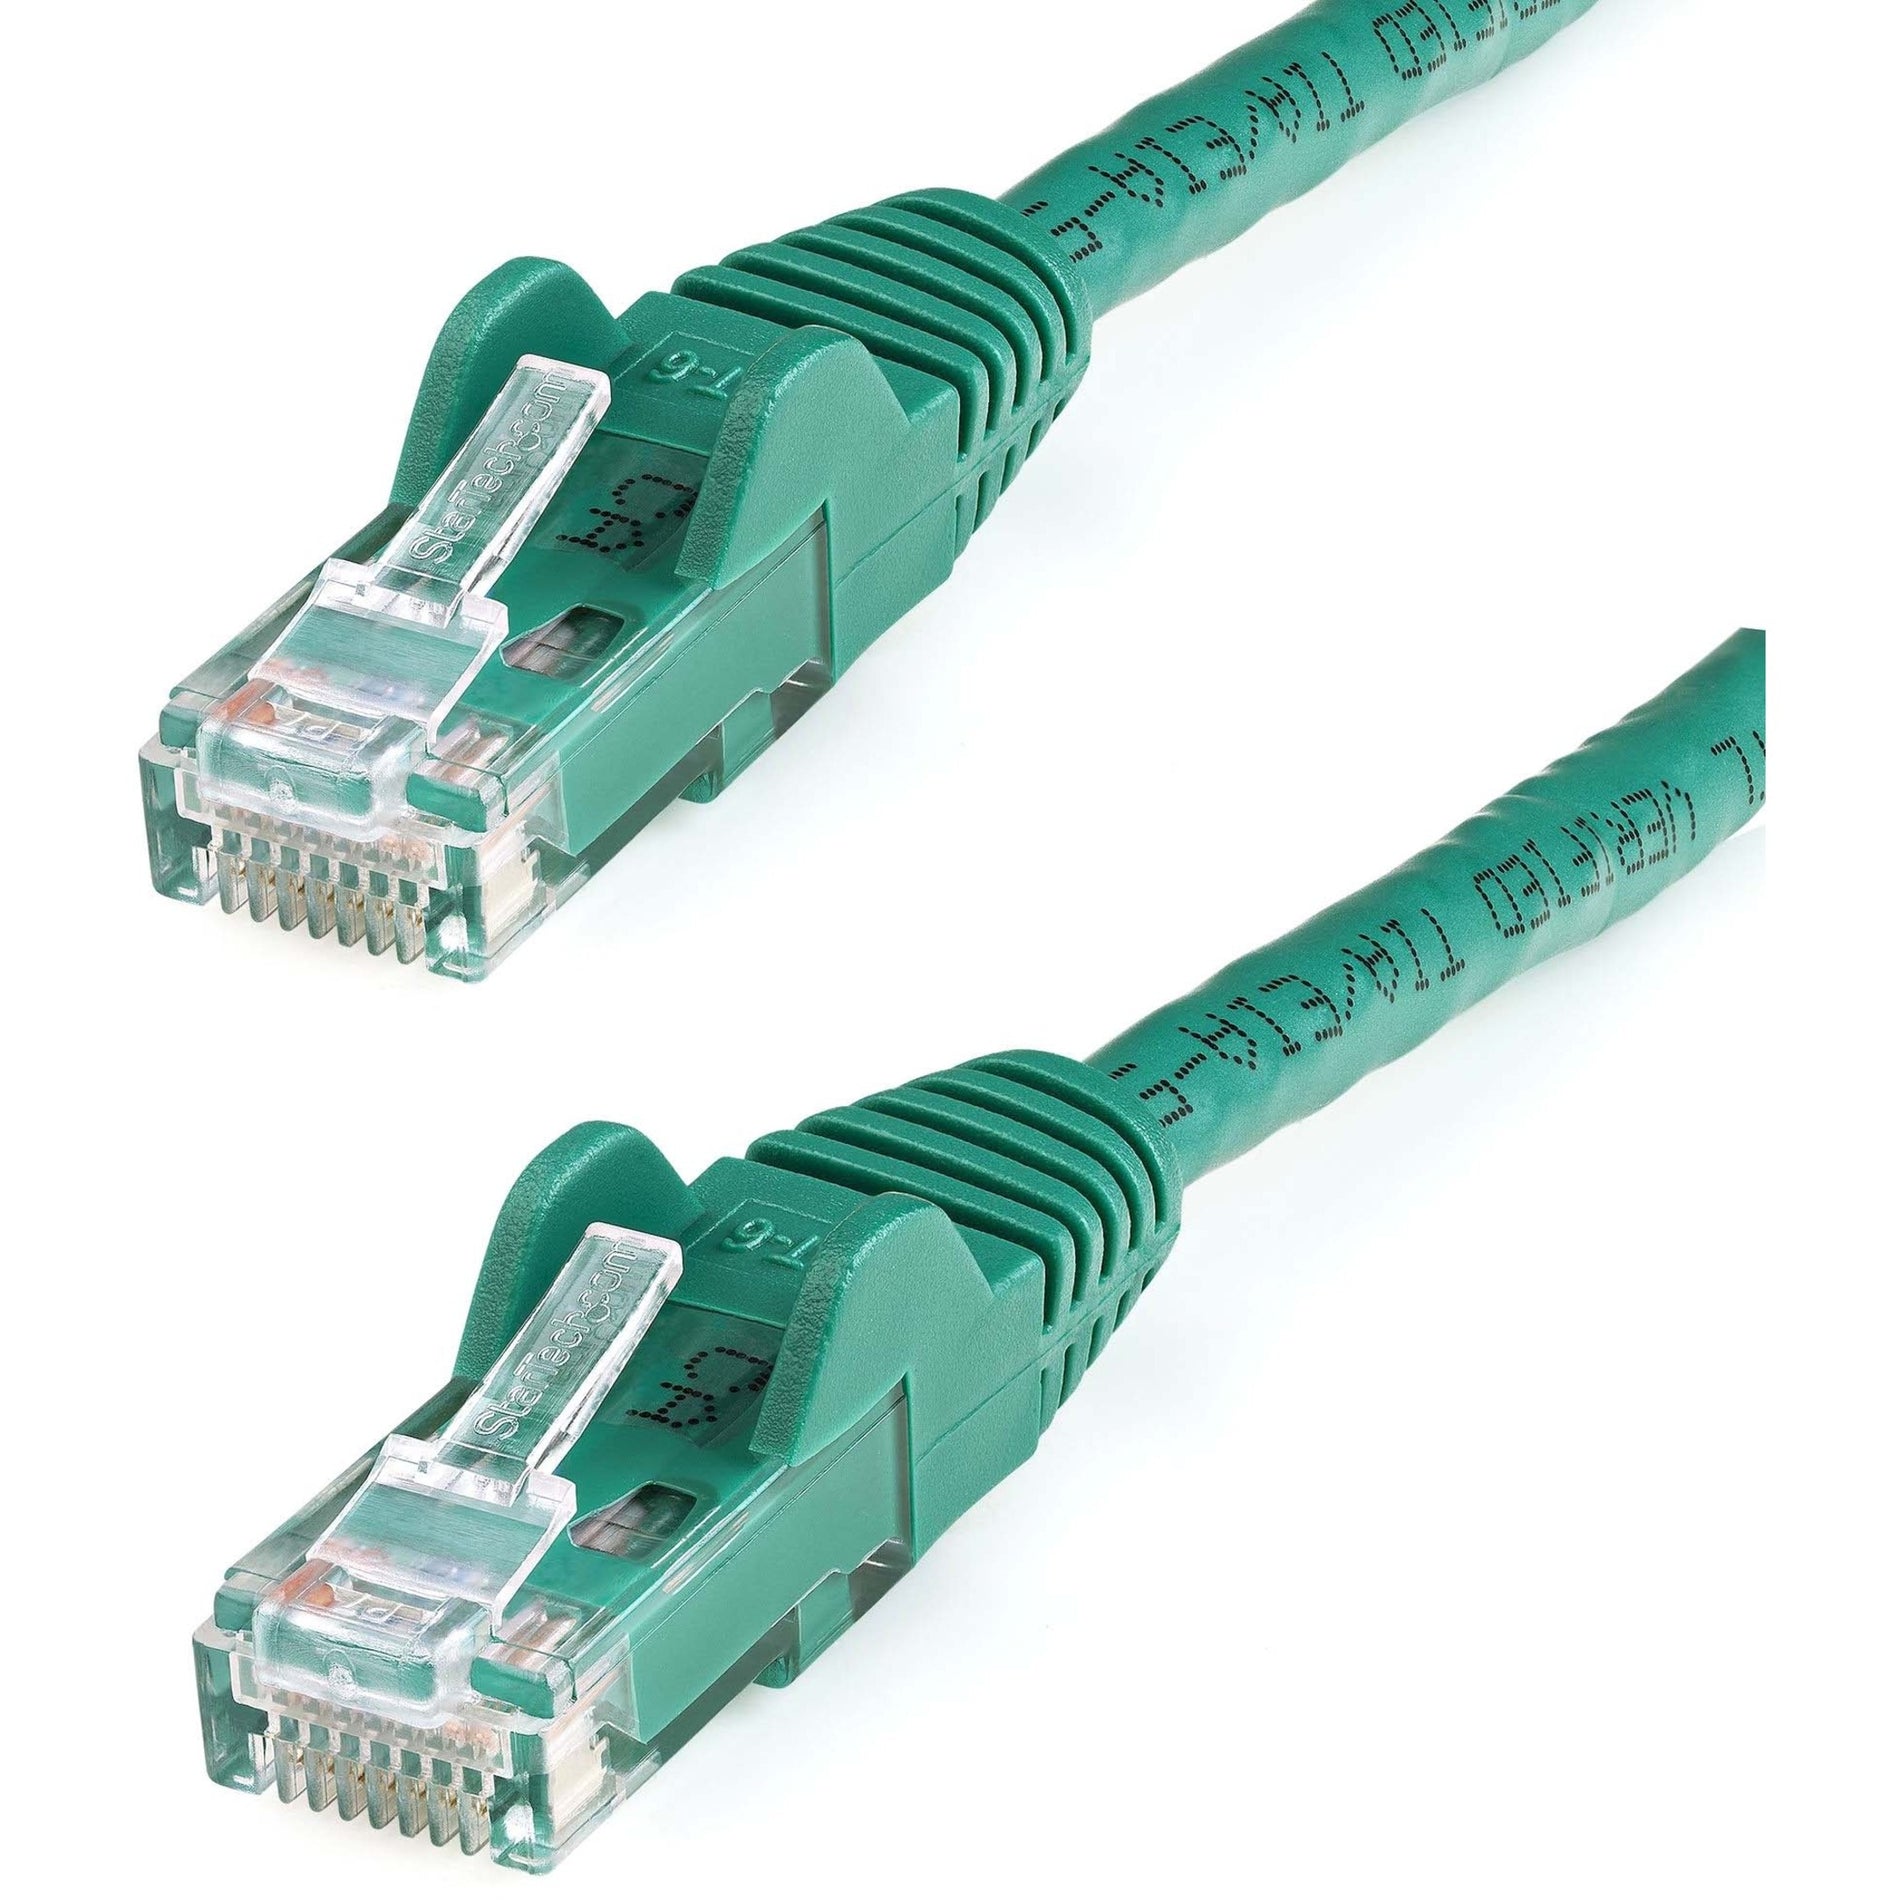 StarTech.com N6PATCH2GN Cat6 Network Cable, 2ft Green Ethernet Cable, Snagless RJ45 Connectors